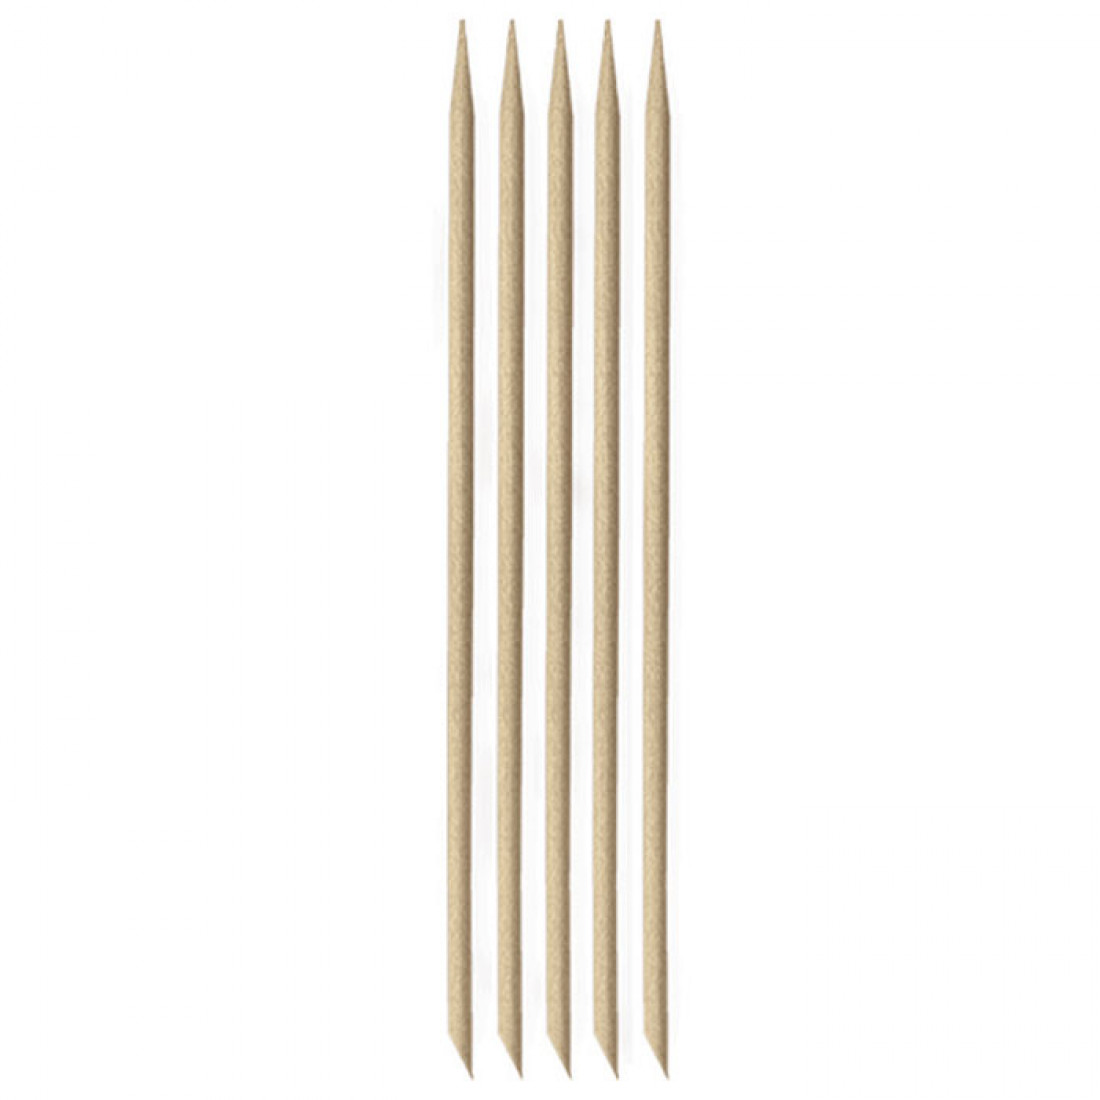 Inter-Vion Manicure-pedicure sticks length 115mm 5pcs - 63499868 OTHER CONSUMABLES-NAILS FORMS-TIPS-EDUCATIONAL MATERIAL